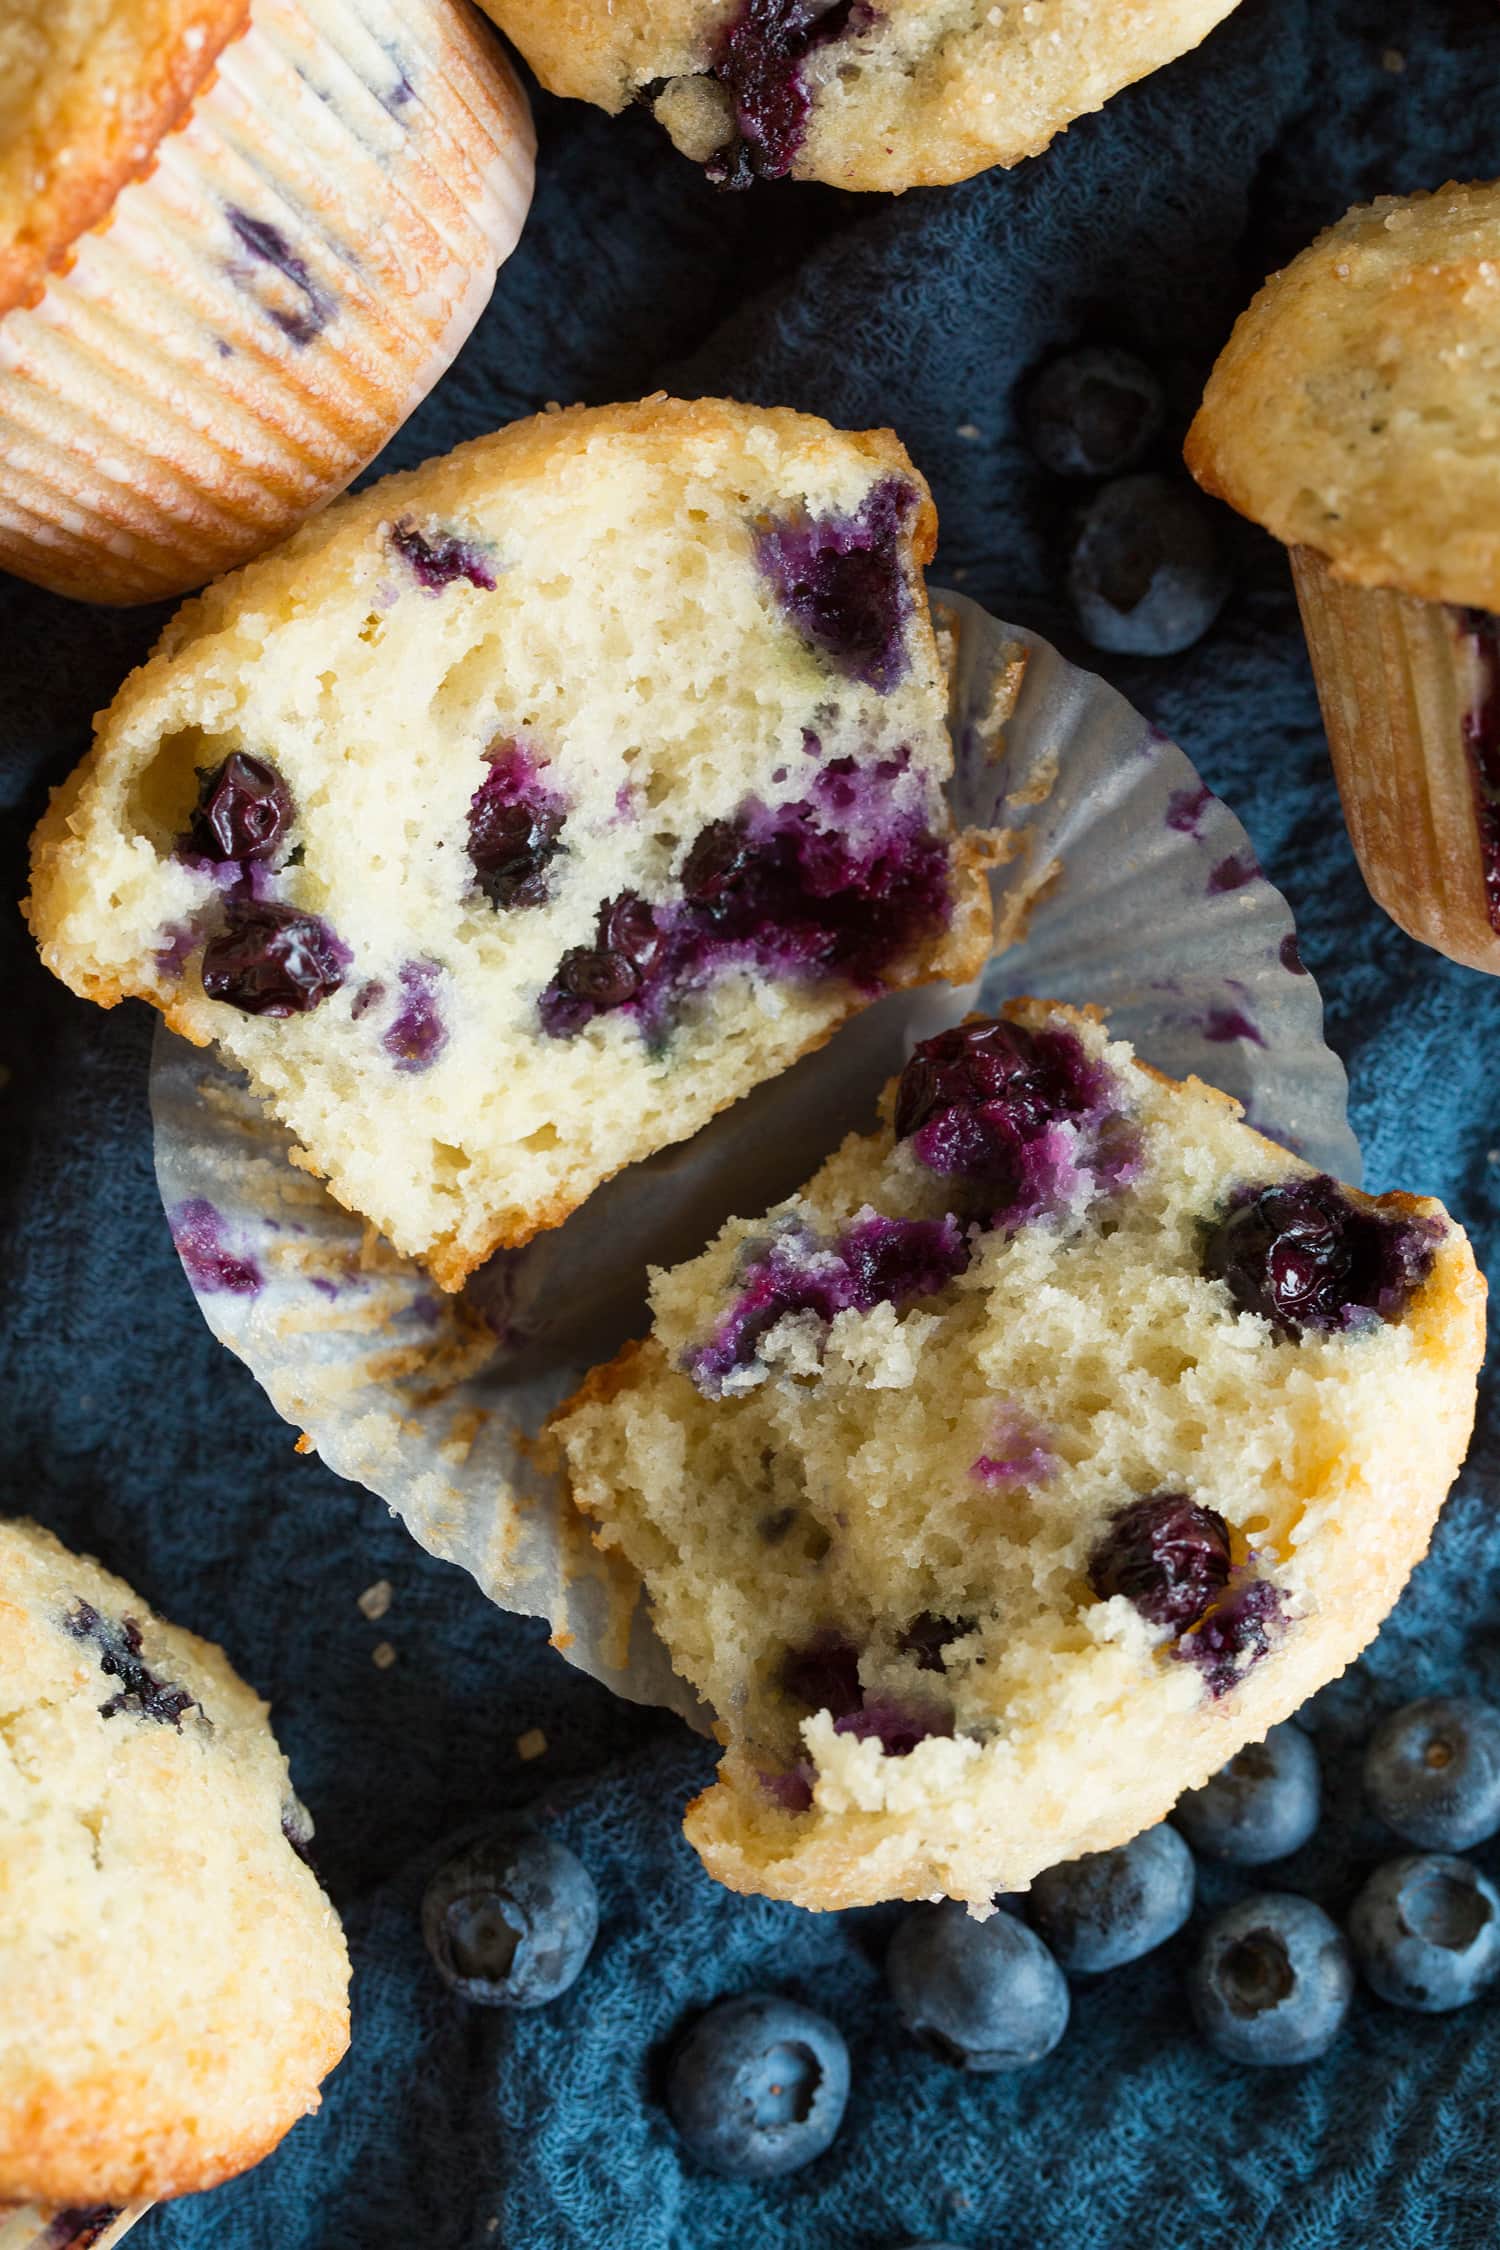 Blueberry muffin torn in half to show texture of muffin inside.